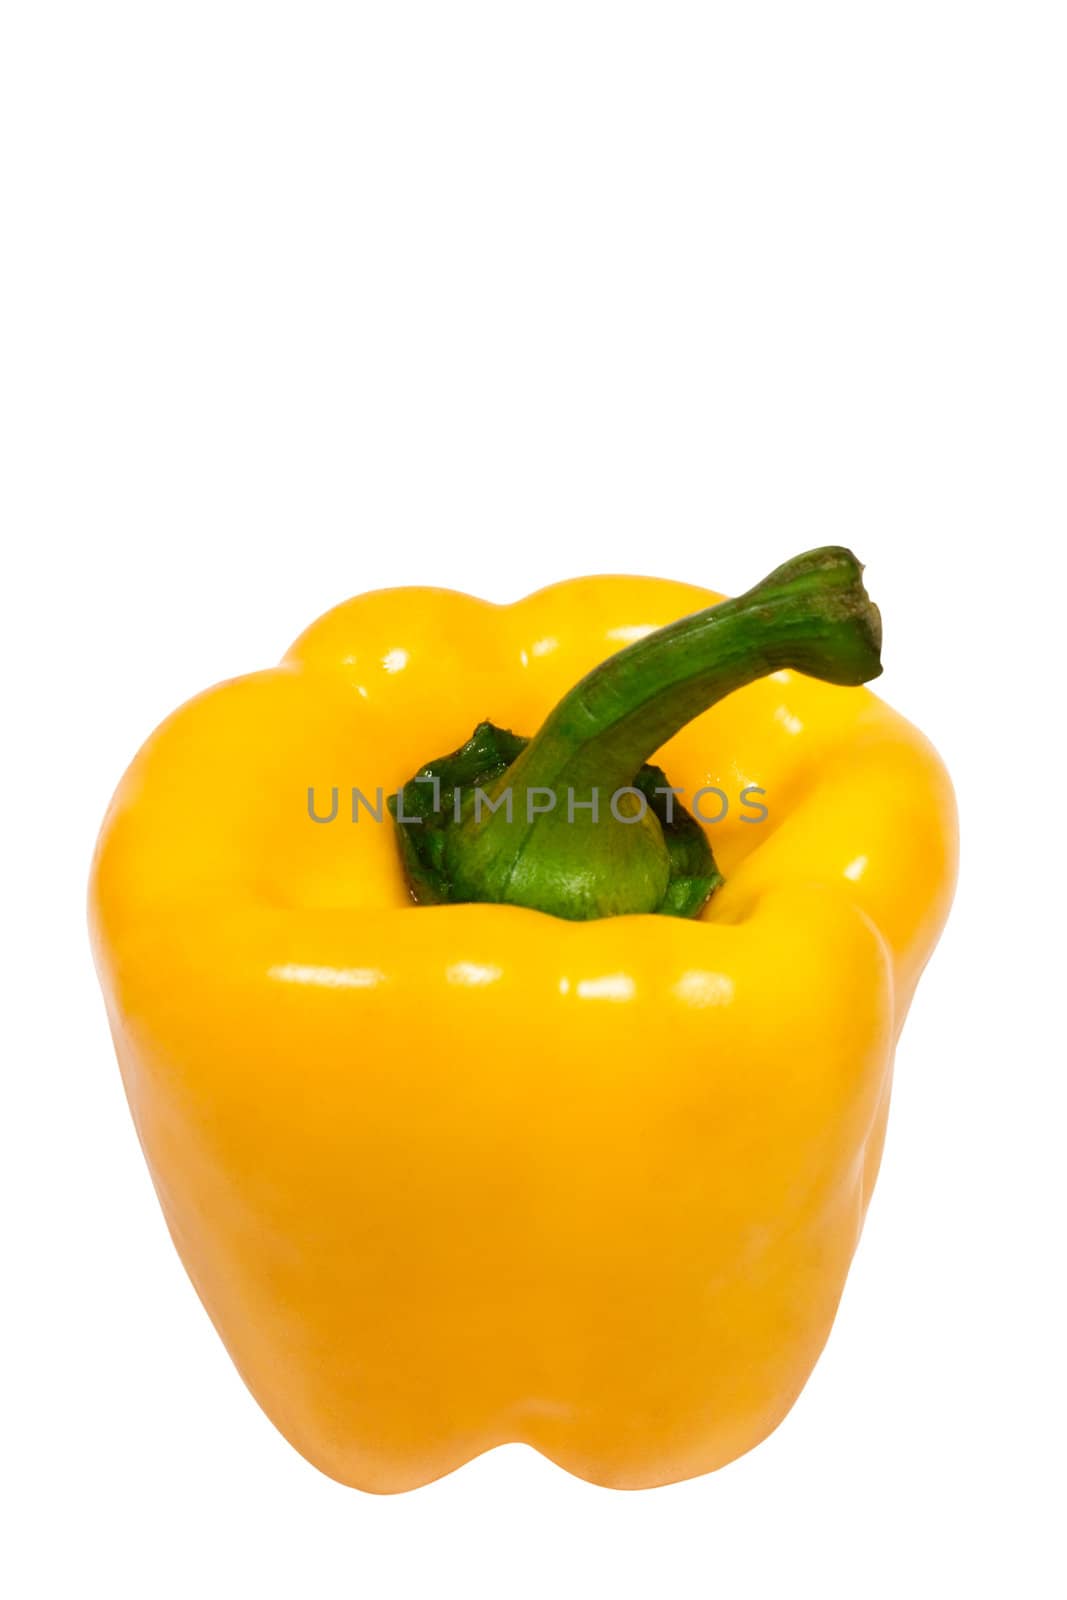 Yellow pepper. Isolated on a white background. File contains clipping path.